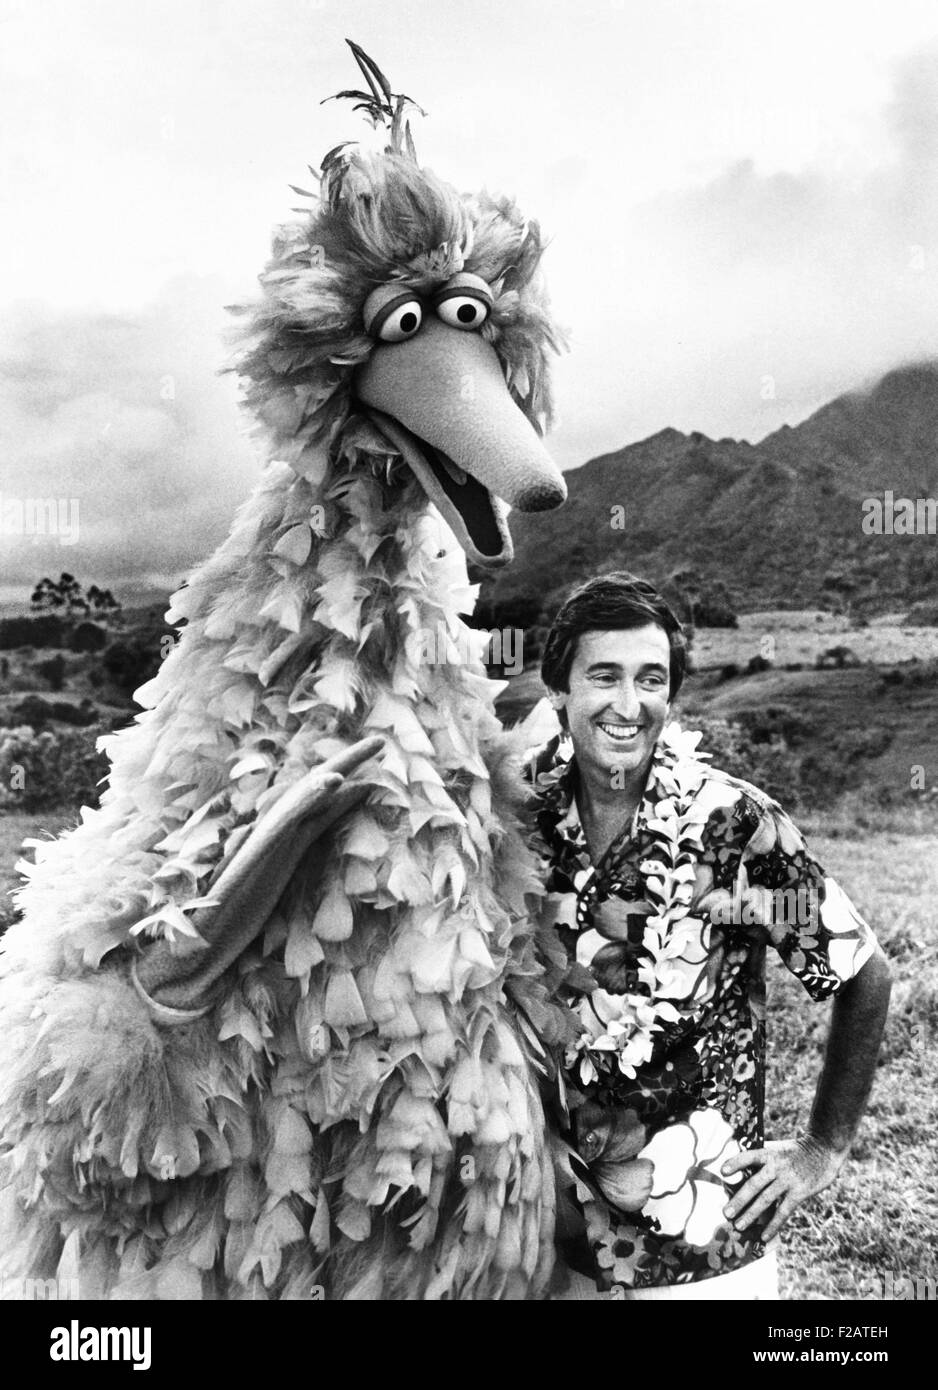 Big Bird (Carroll Spinney) and Bob McGrath of SESEME STREET on the Hawaiian Island of Kauai. They were taping a special location-based episode for the 1977-78 season. (CSU 2015 11 1679) Stock Photo